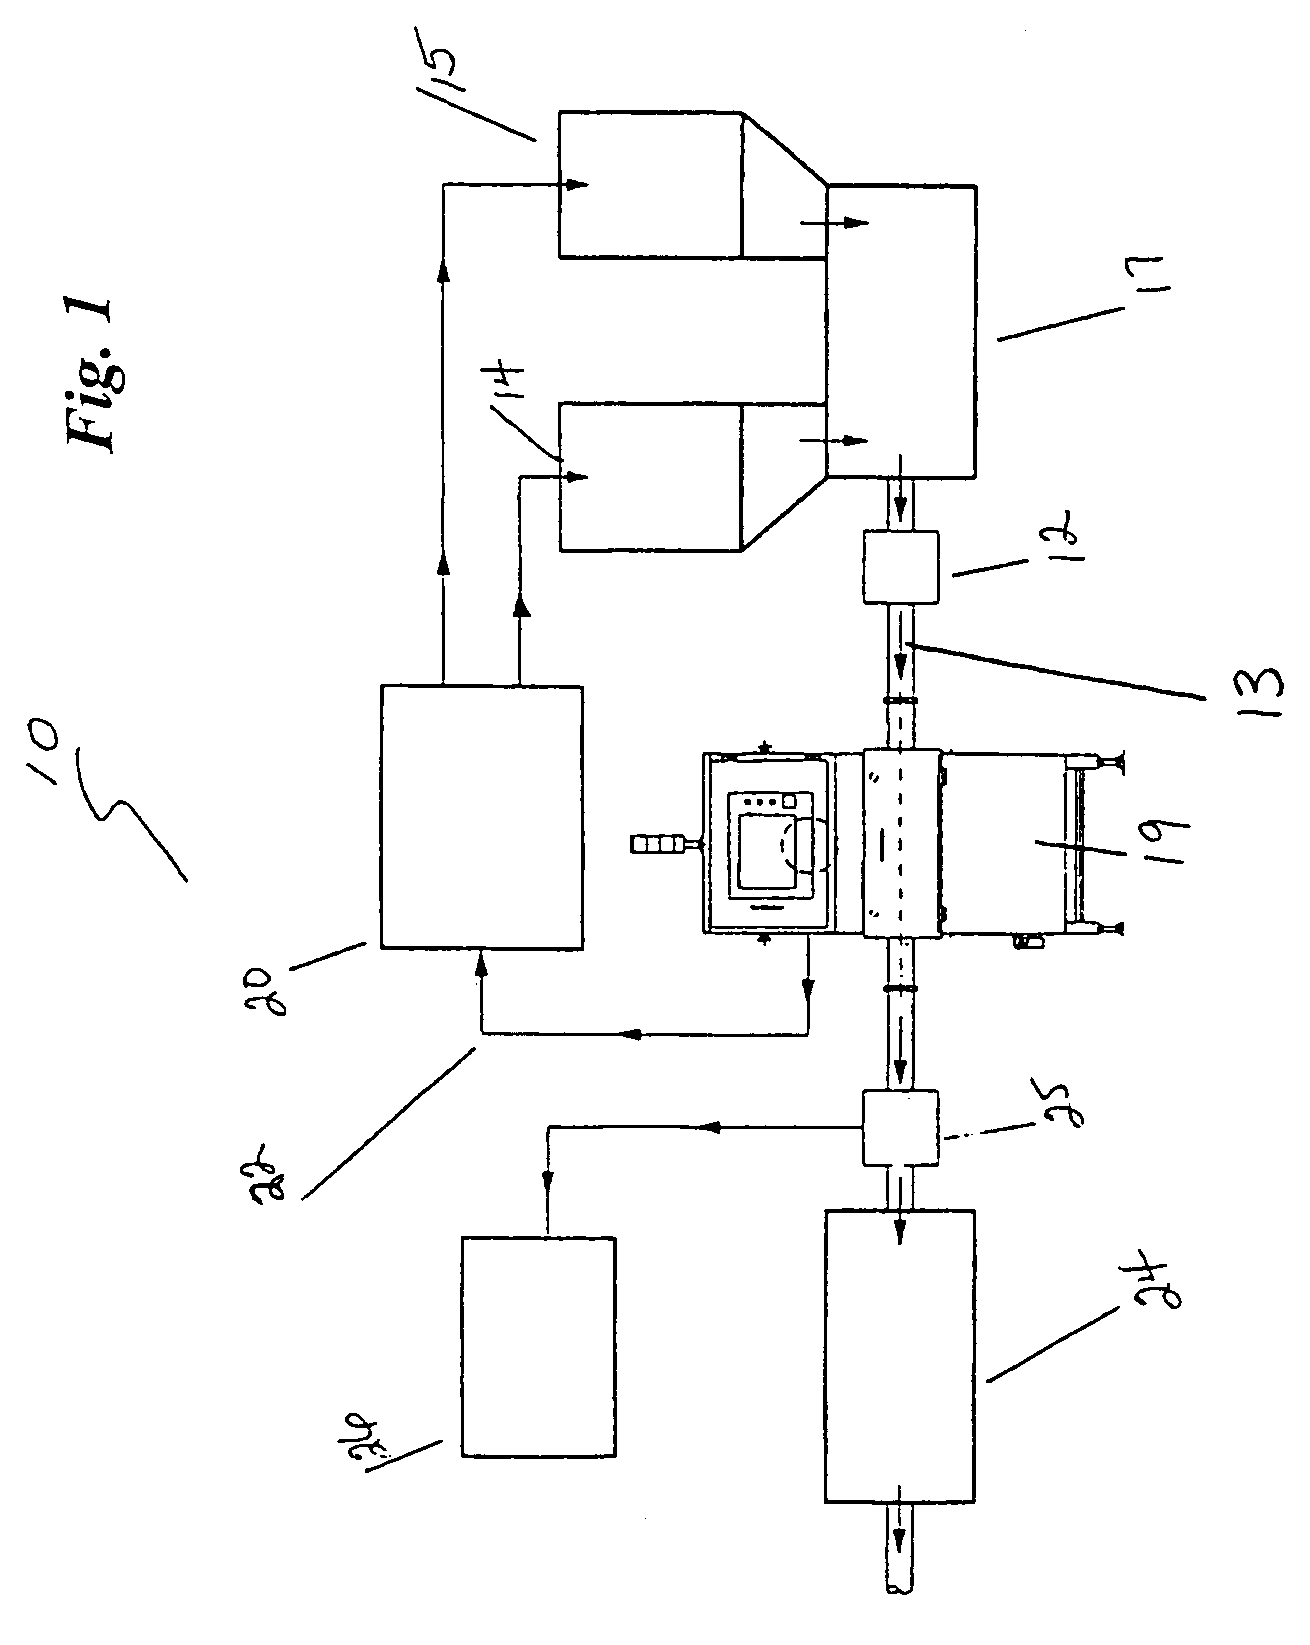 Method and apparatus for meat scanning